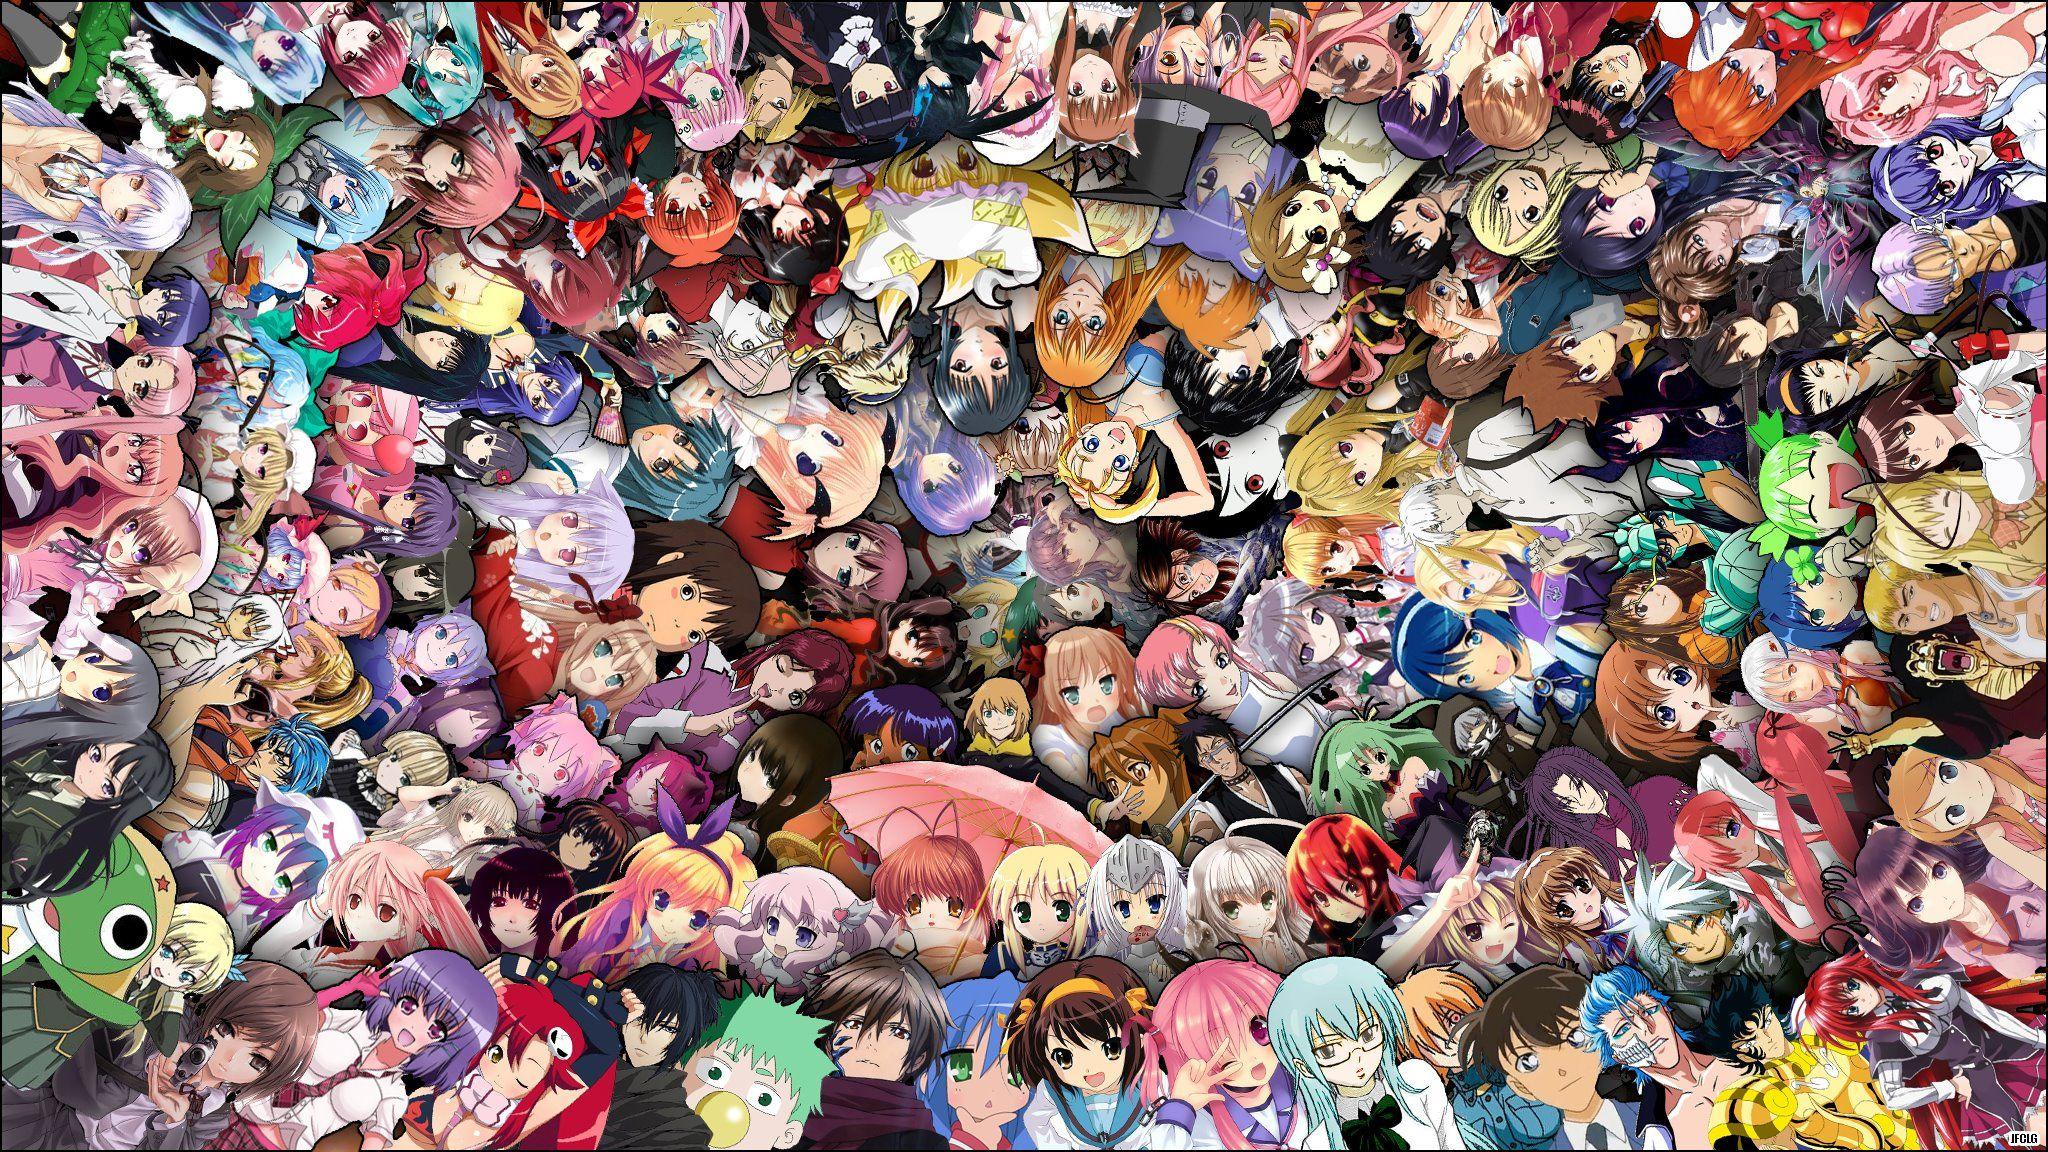 Anime Manga Characters Collage Poster Art Print in multiple sizes  eBay